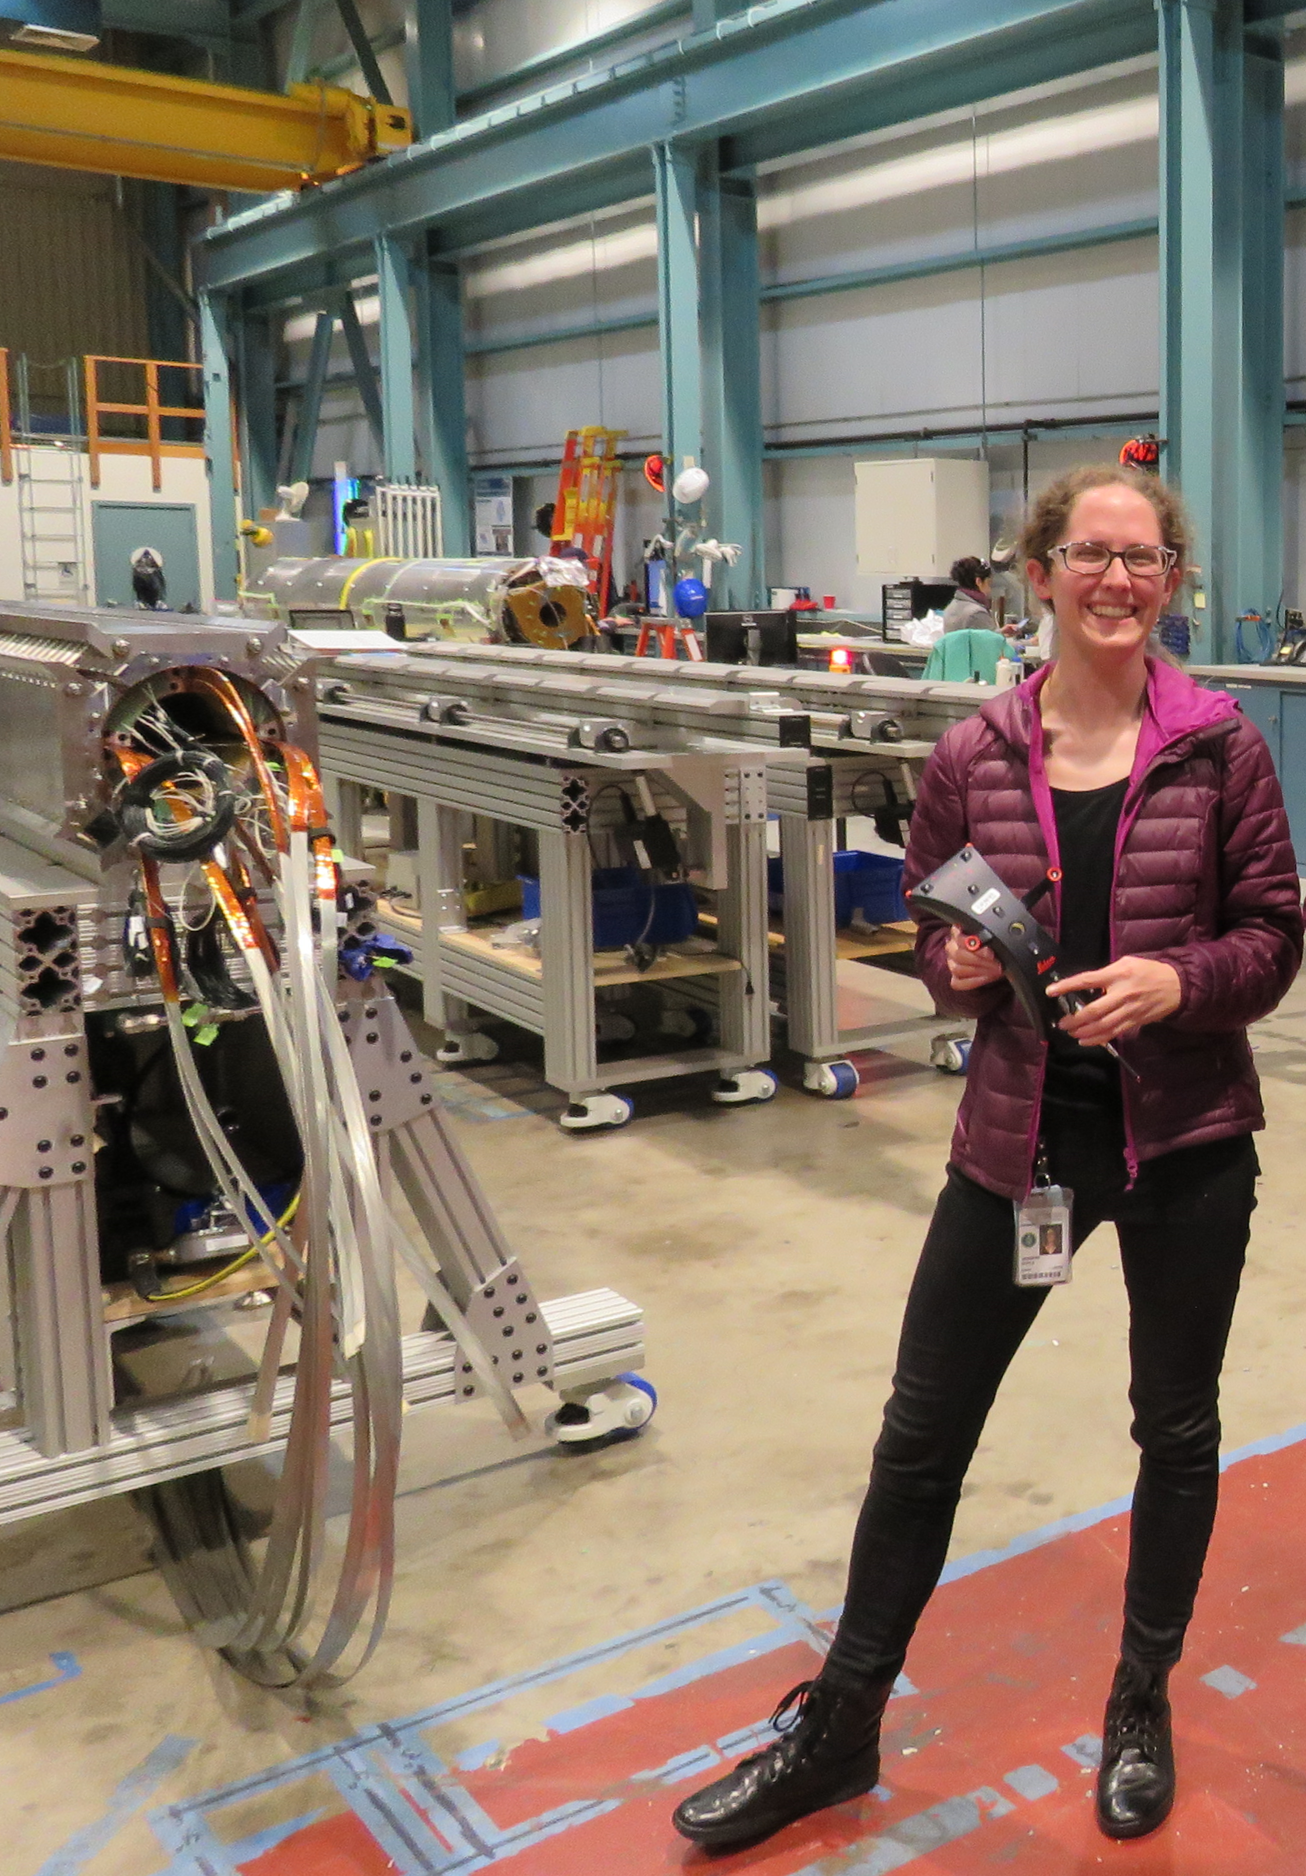 Engineer Jennifer Doyle in front of her latest project.